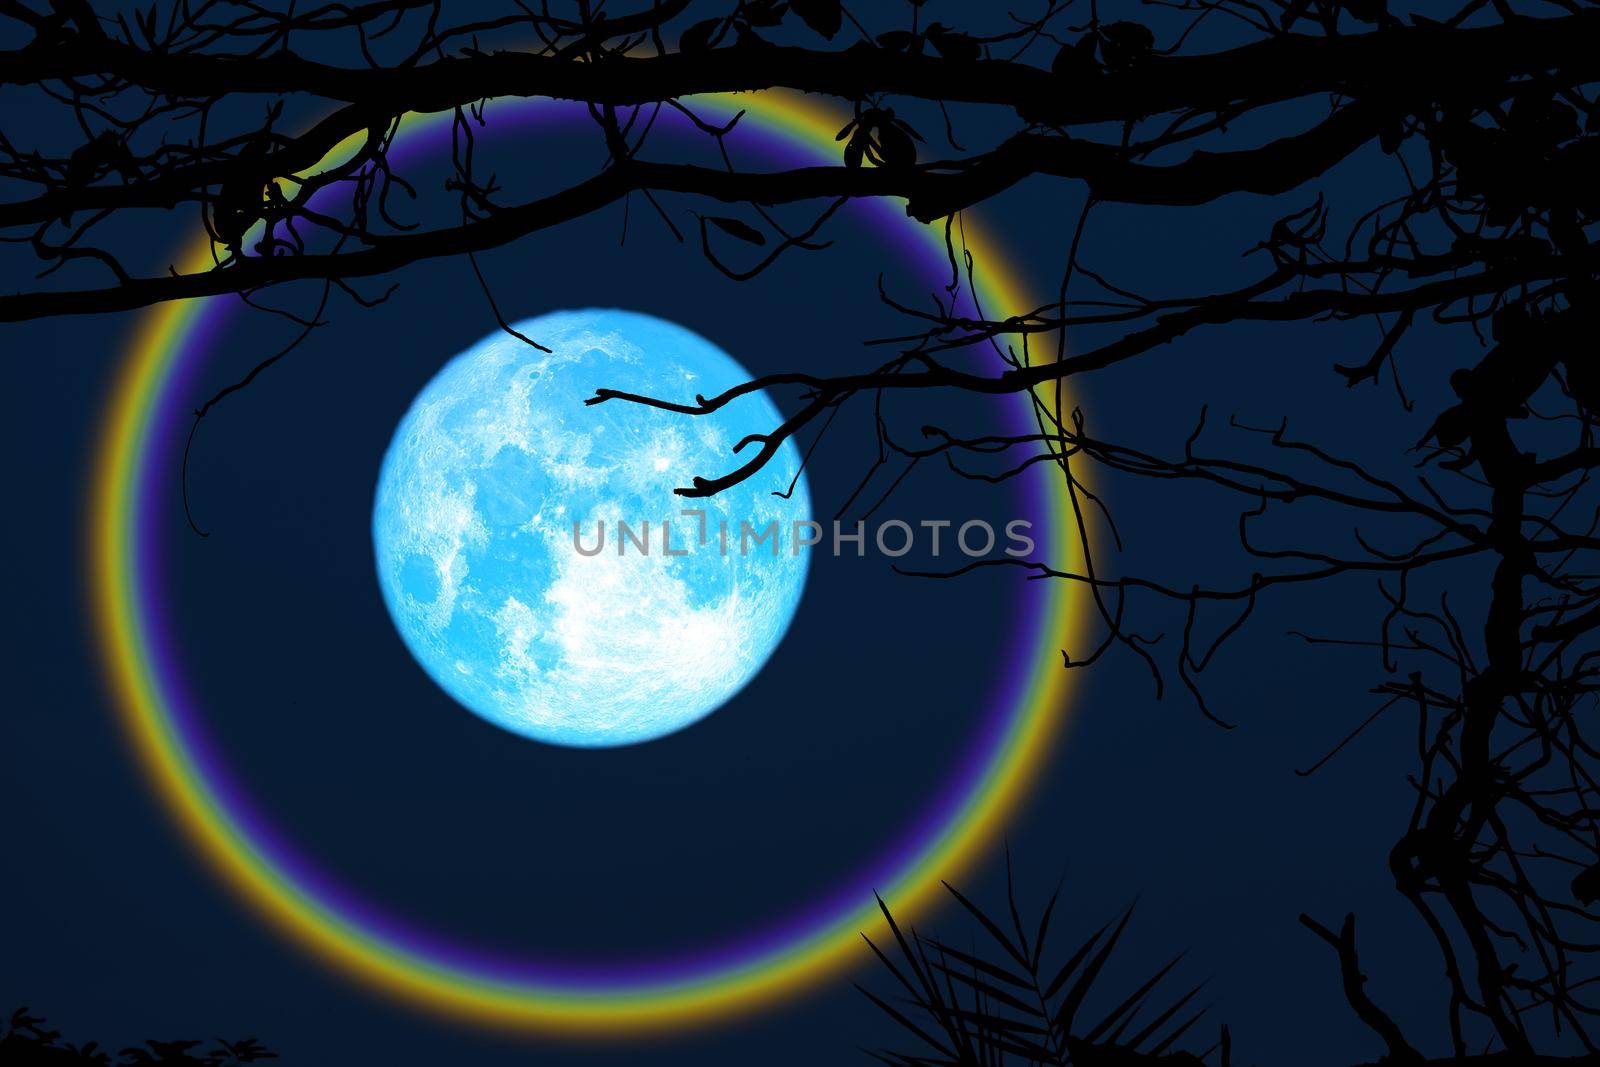 harvest blue moon halo branch trees in the night sky, Elements of this image furnished by NASA